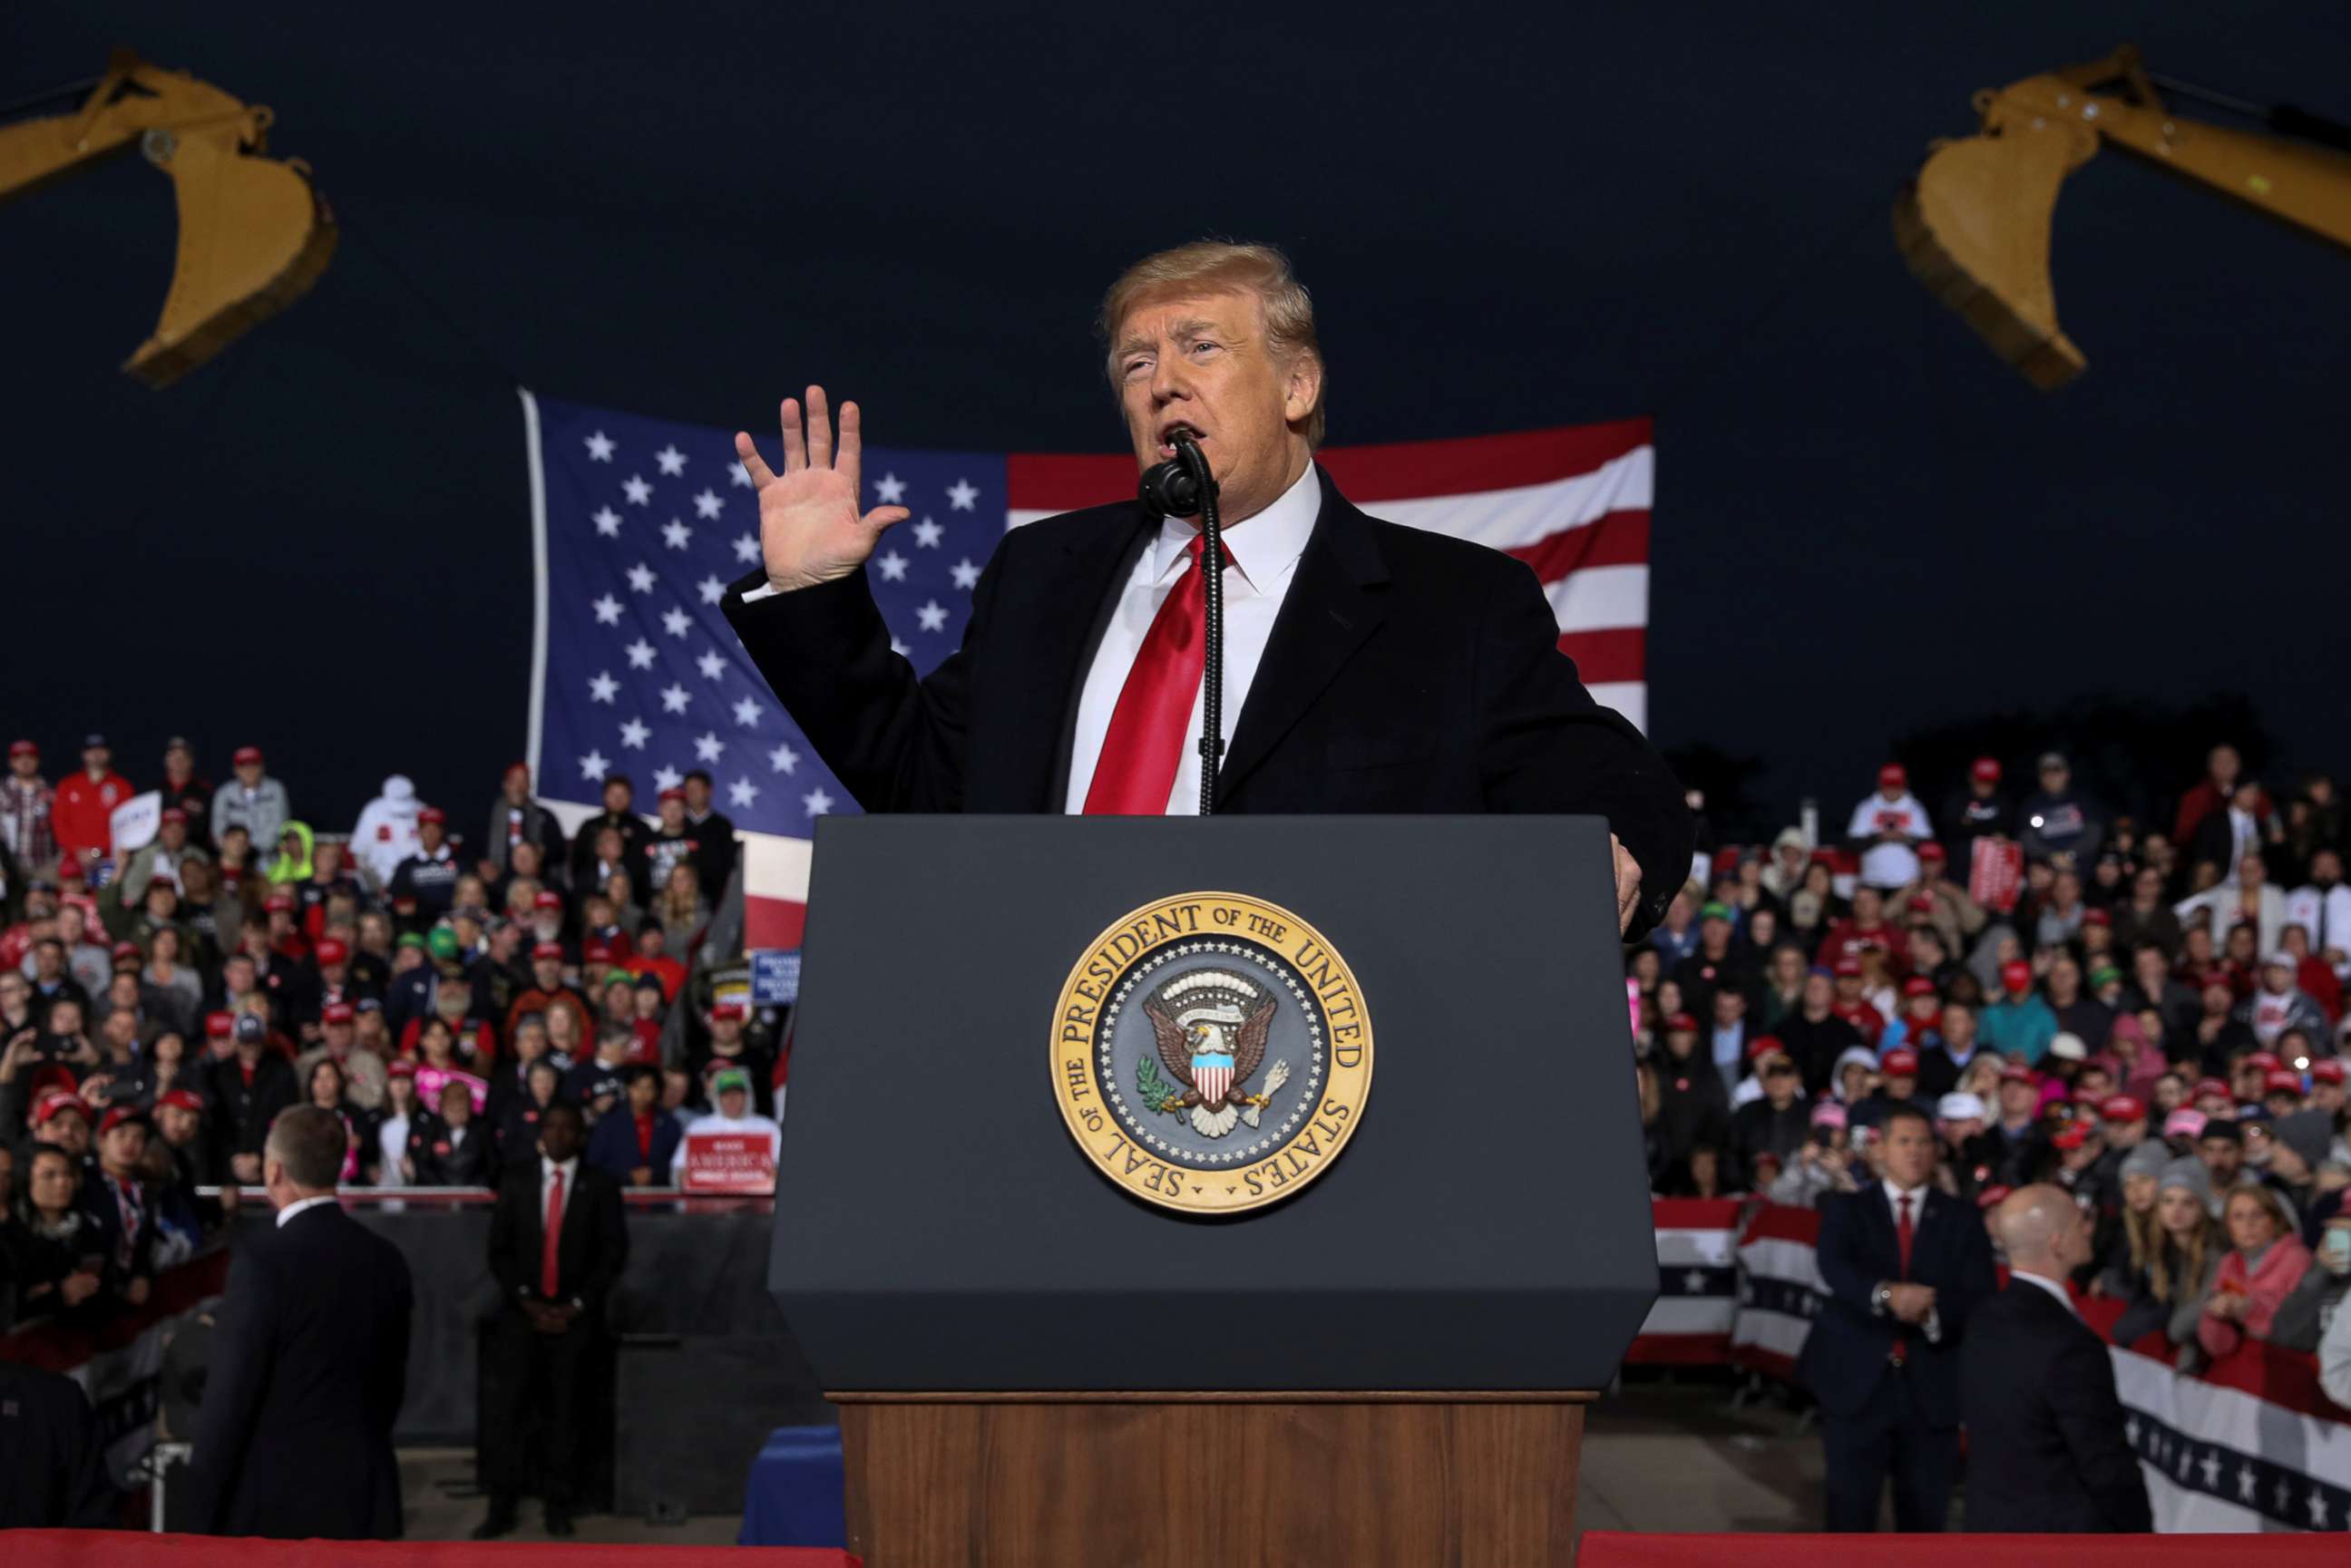 PHOTO: President Donald Trump speaks during a campaign rally with supporters at the Warren County Fairgrounds in Lebanon, Ohio, Oct. 12, 2018.